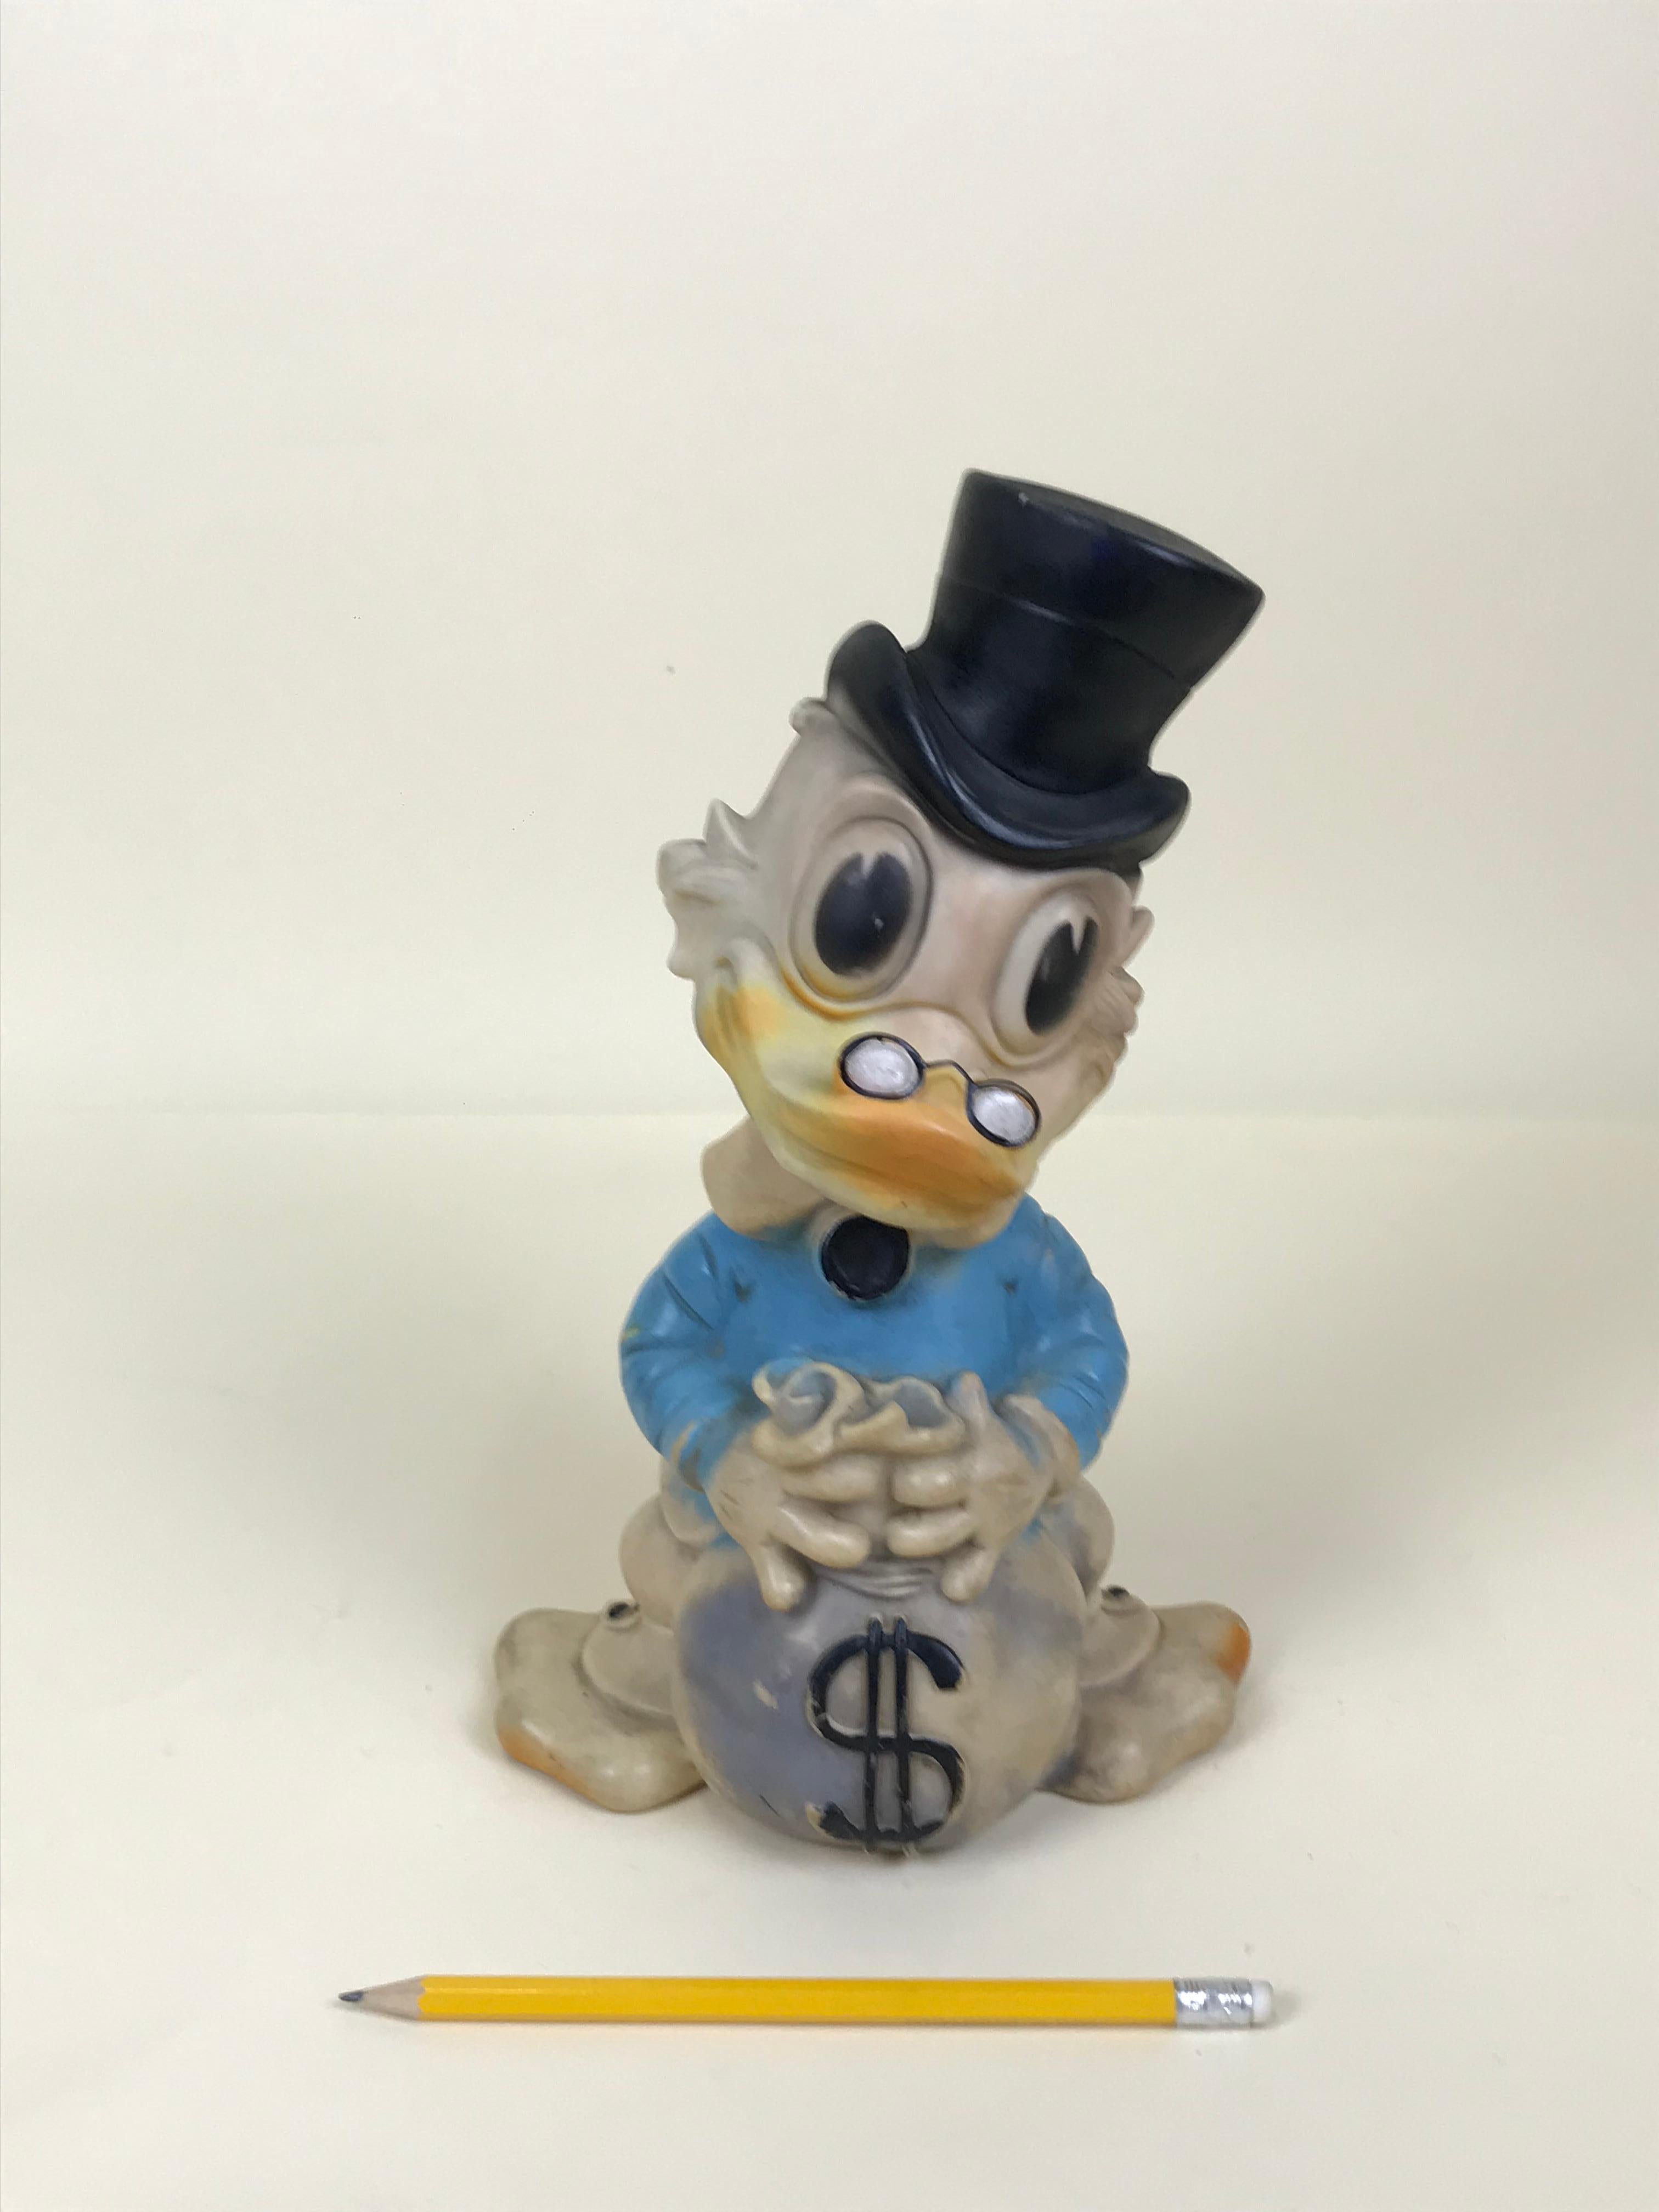 Very rare vintage blue Uncle Scrooge squeak rubber toy with bag of coins made by Biserka in ex Yugoslavia now Croatia in the 1960s.

This model is one of the six different color model originally produced.

Marked 